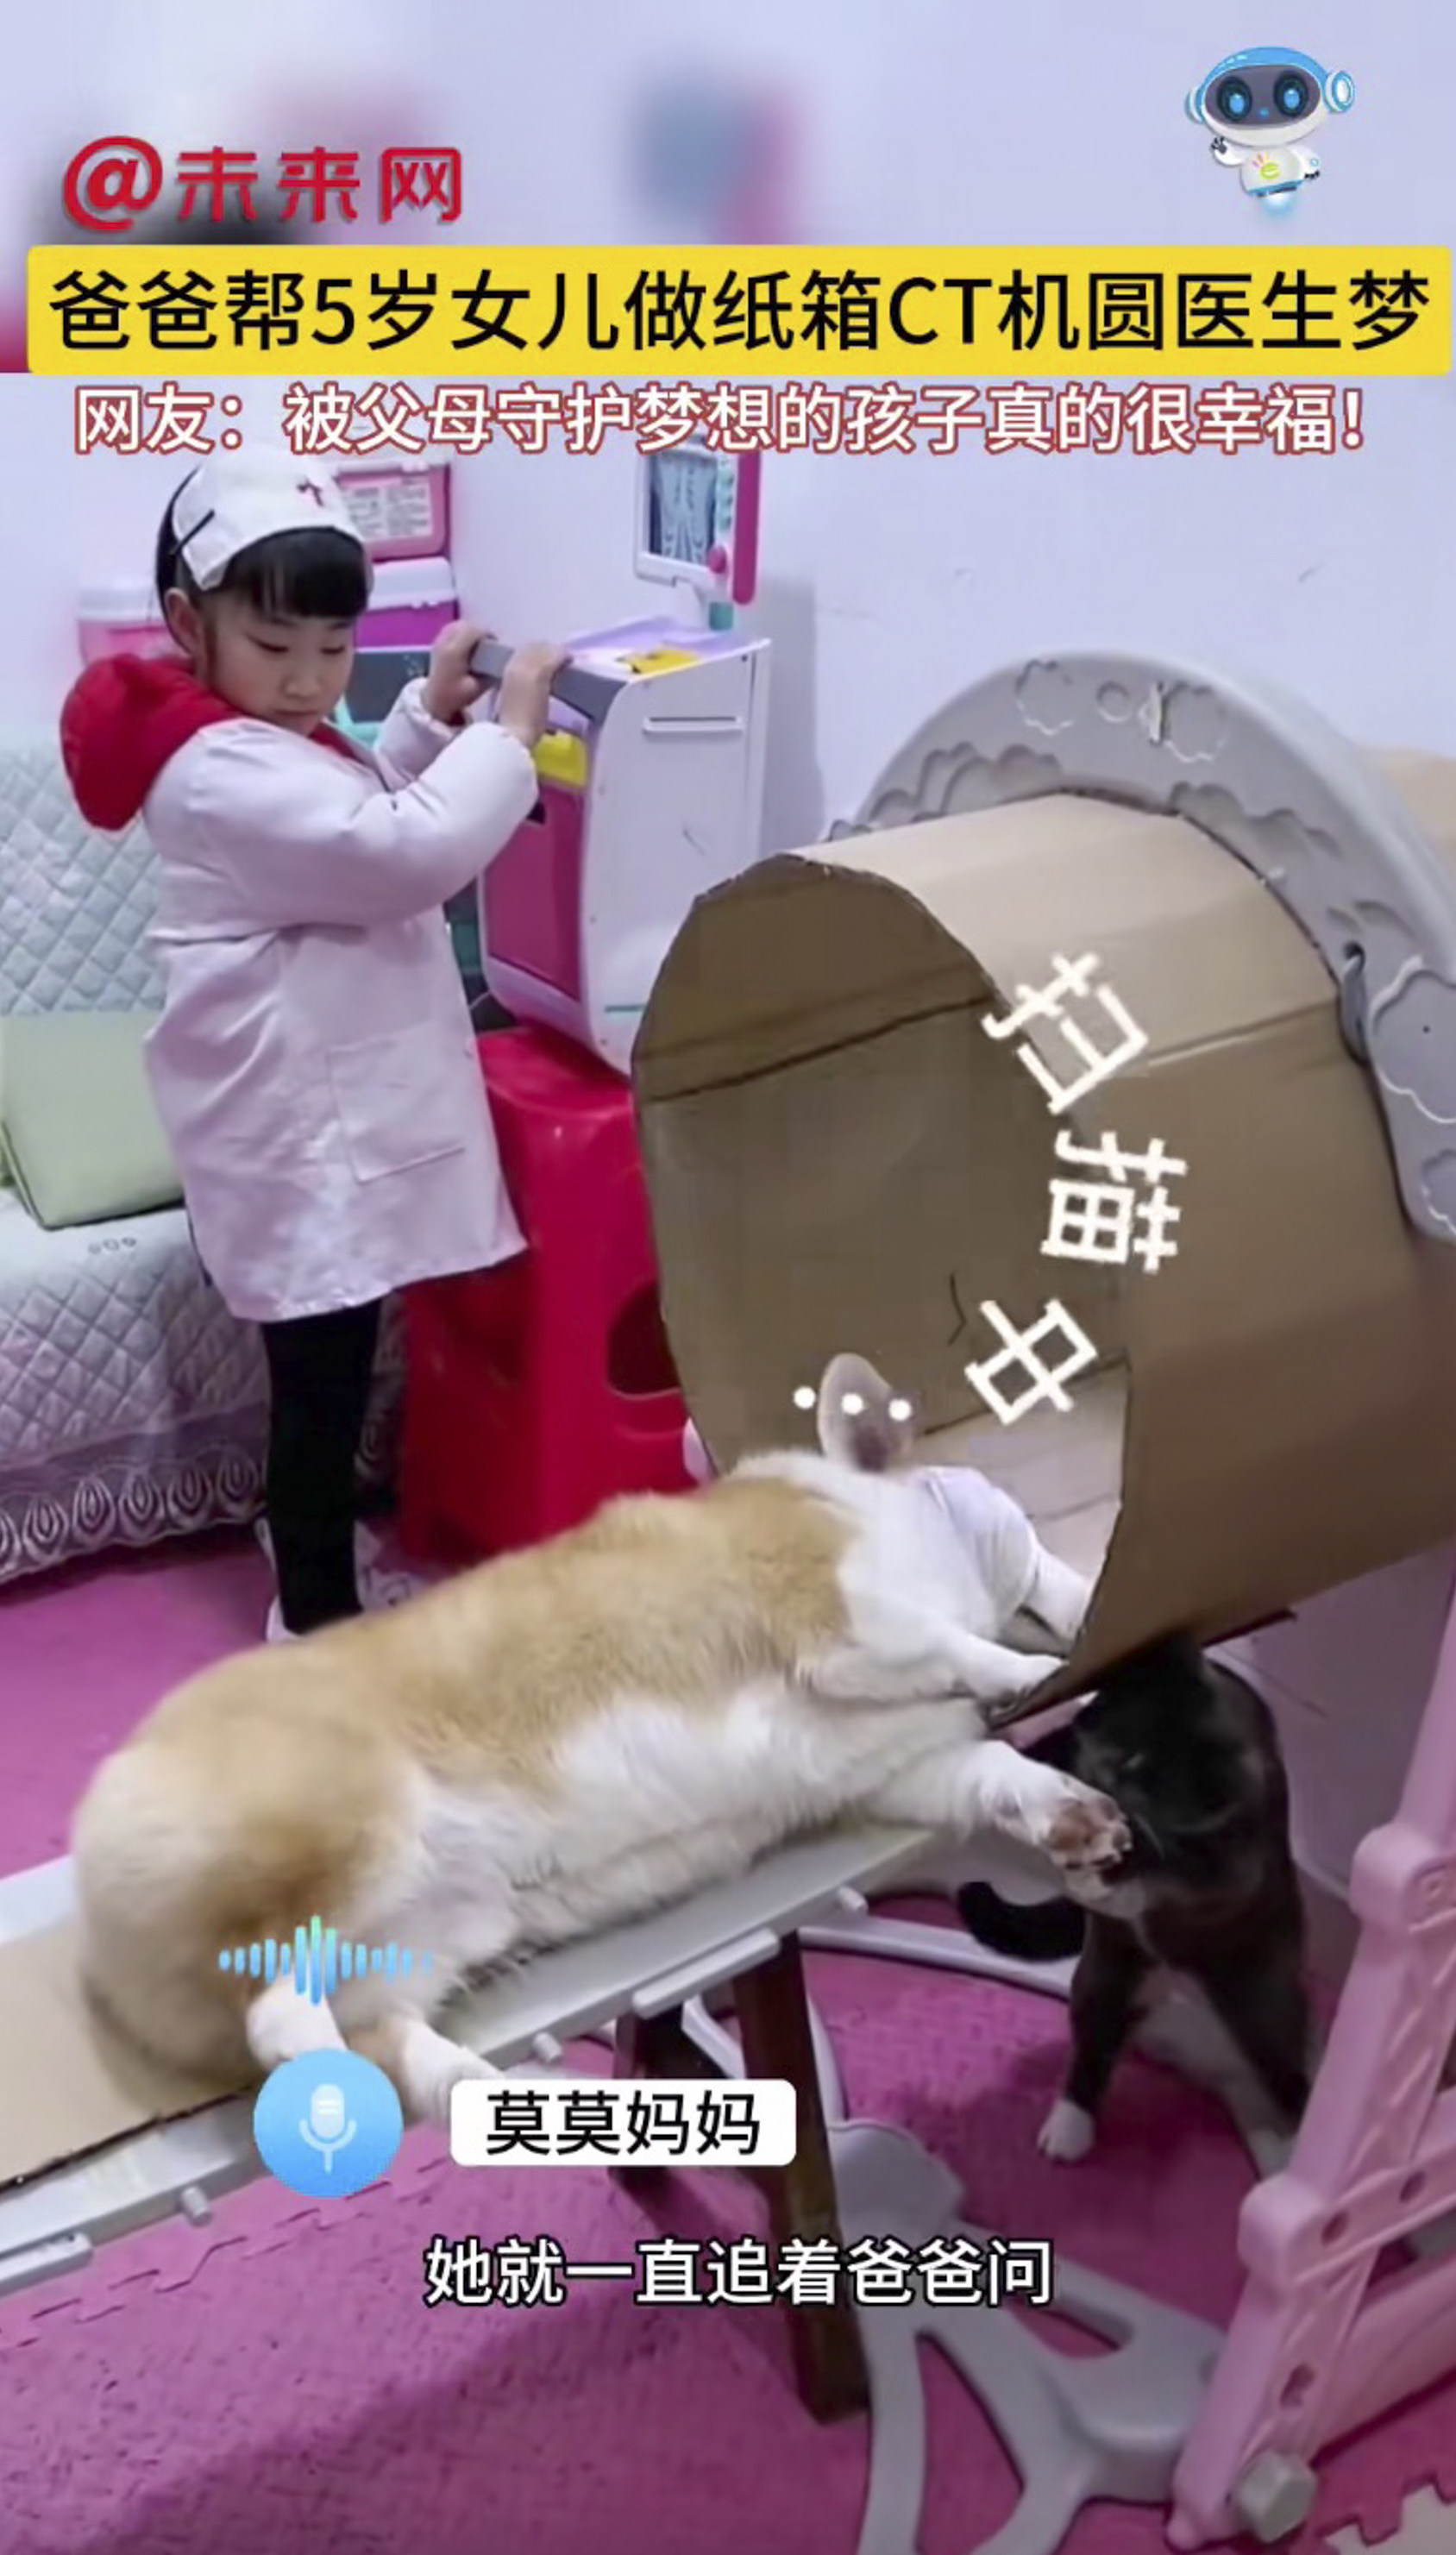 Momo’s cardboard CT scan machine video has become one of China’s top trending topics online. Photo: Douyin